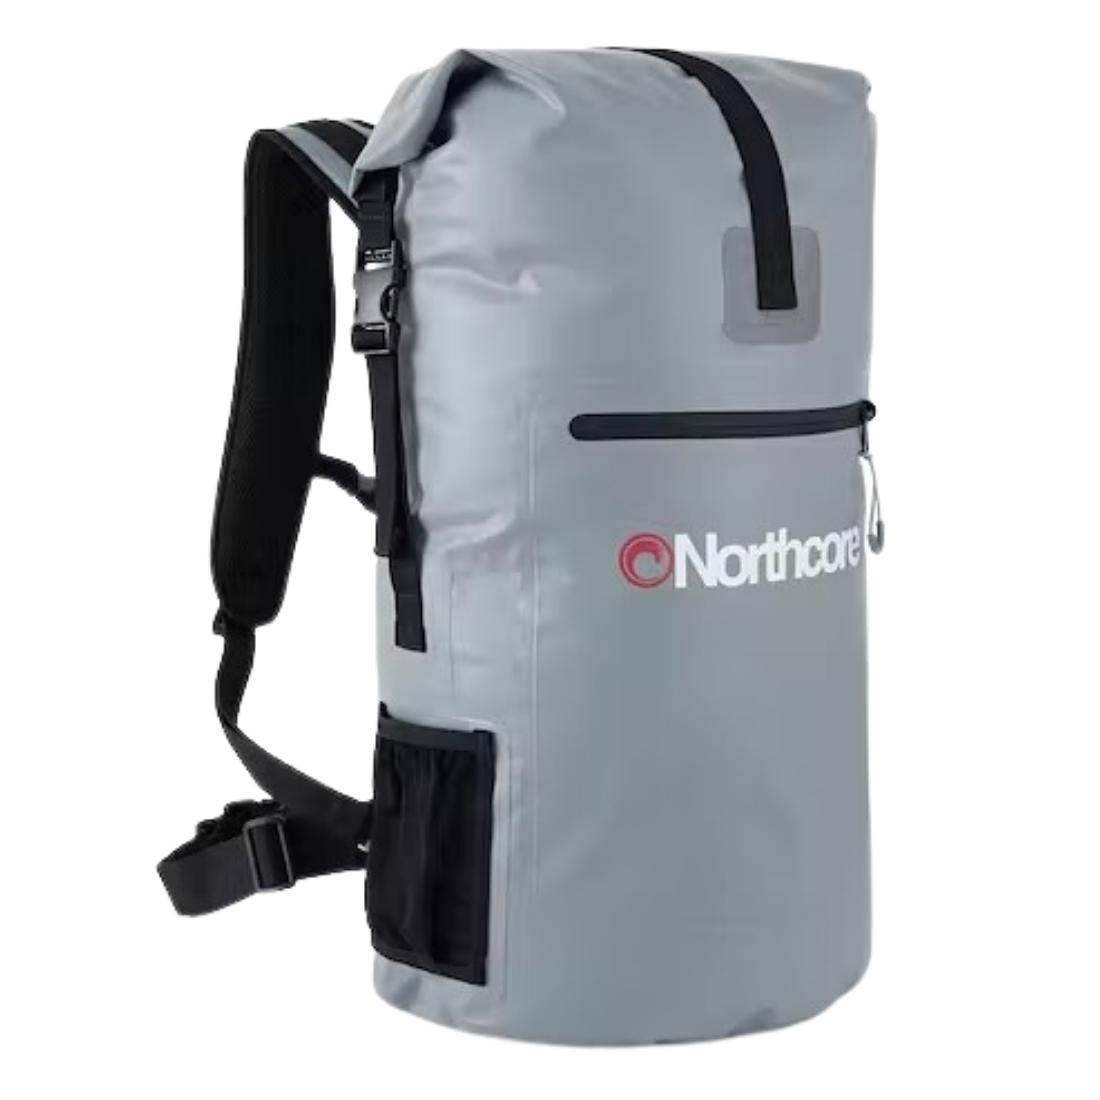 Northcore Waterproof Haul Surf Backpack - Grey - Wet/Dry Bag by Northcore 35L